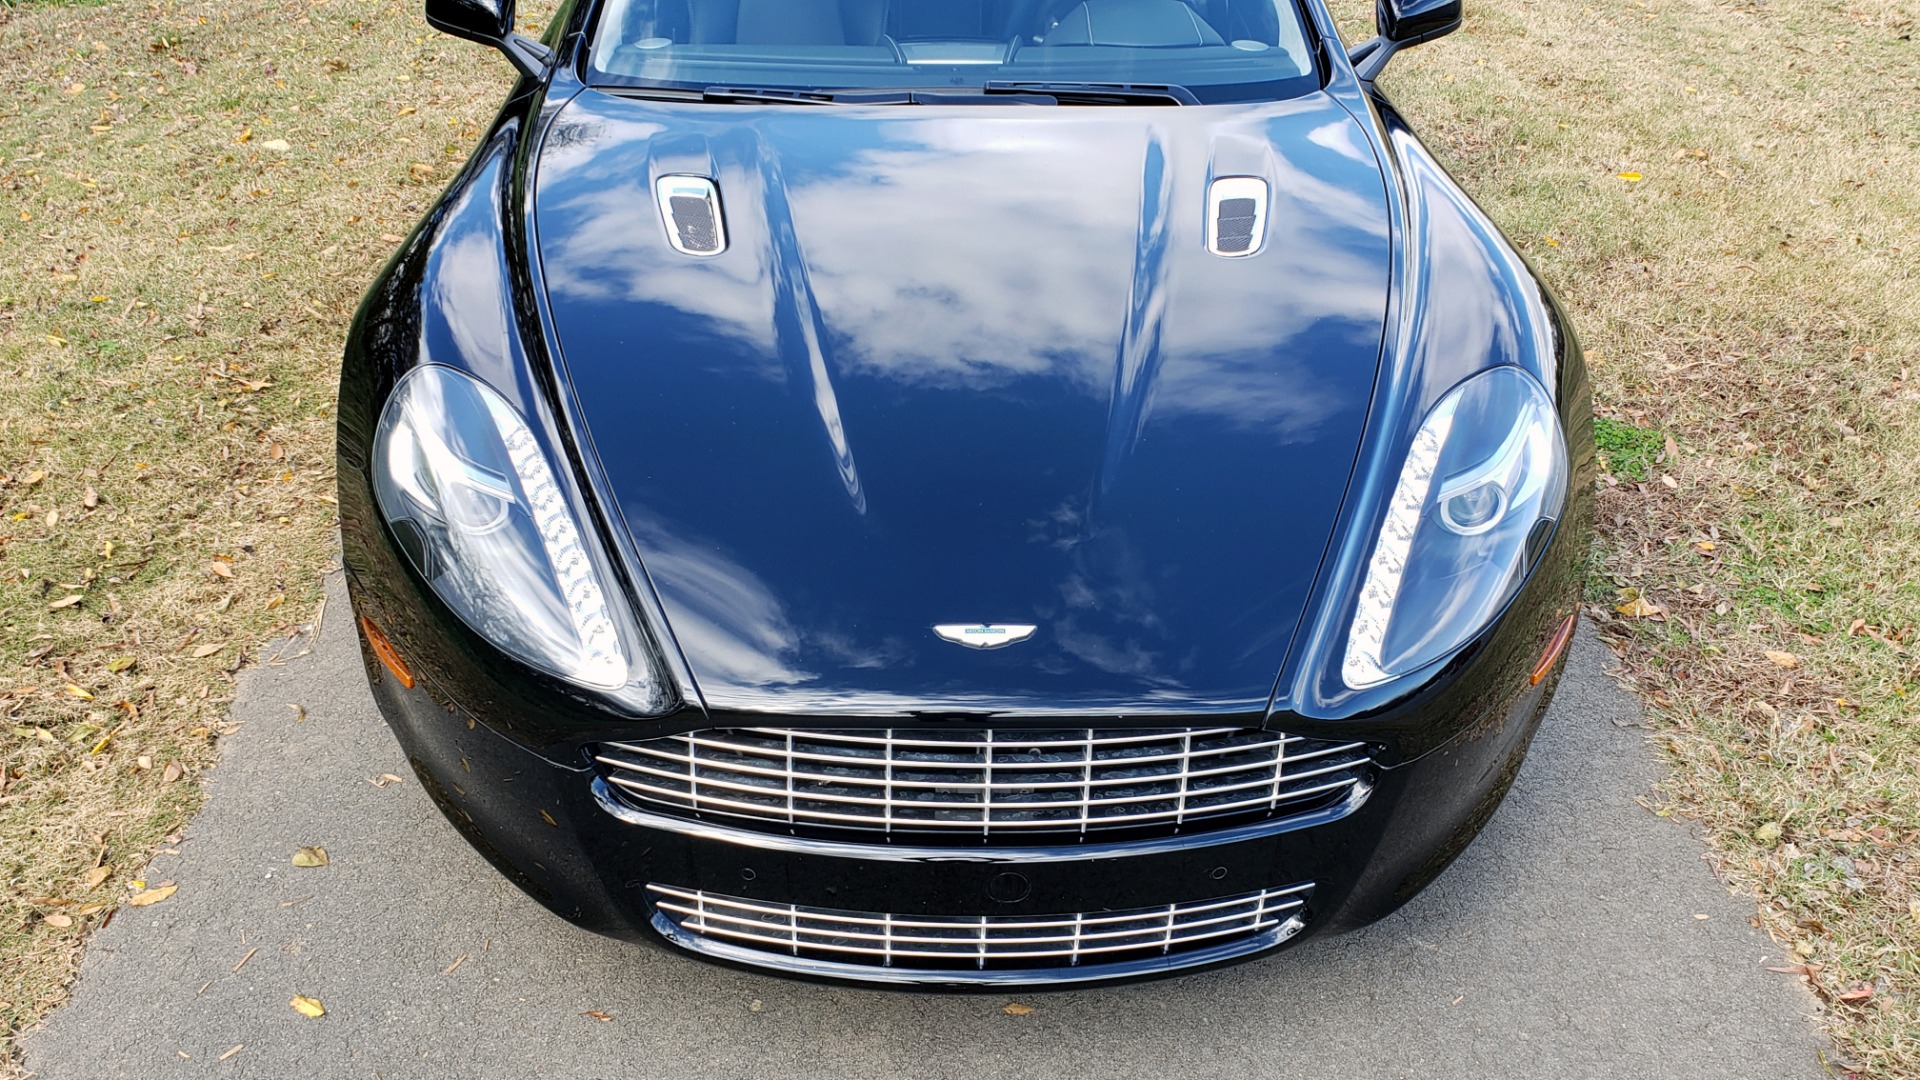 Used 2012 Aston Martin RAPIDE LUXURY 6.0L V12 / NAV / B&O SND / ENTERTAINMENT / REARVIEW for sale Sold at Formula Imports in Charlotte NC 28227 14